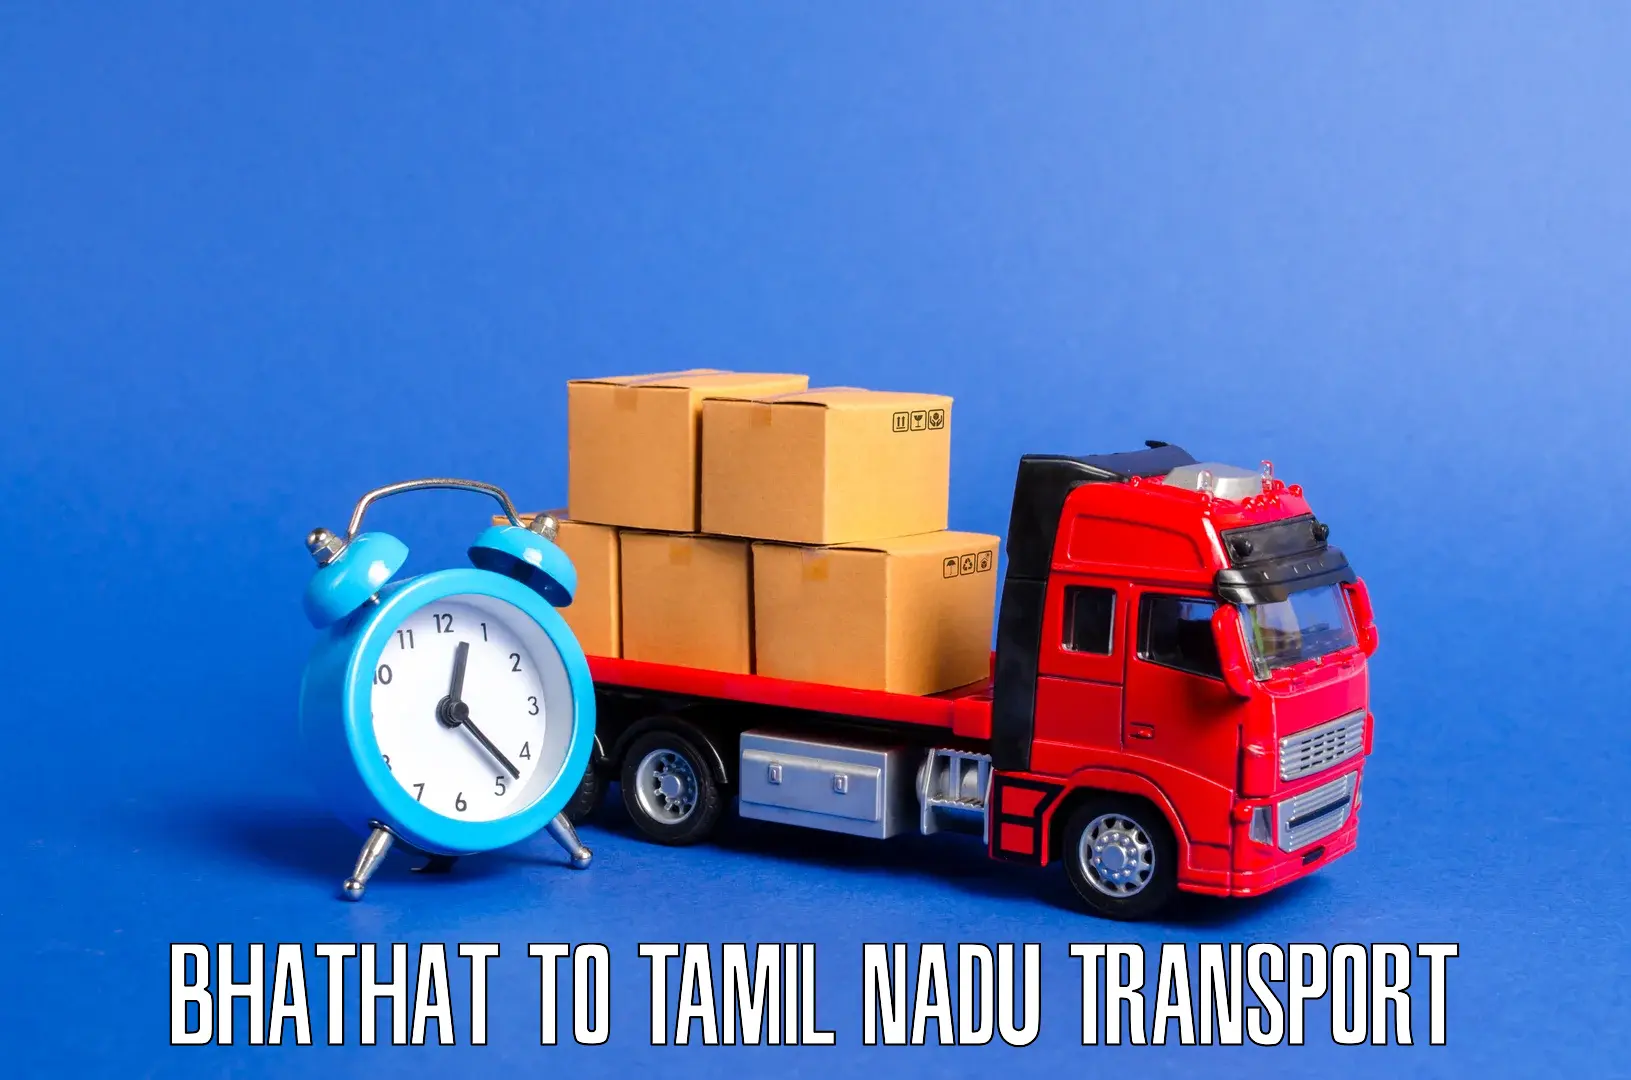 Truck transport companies in India Bhathat to Salem